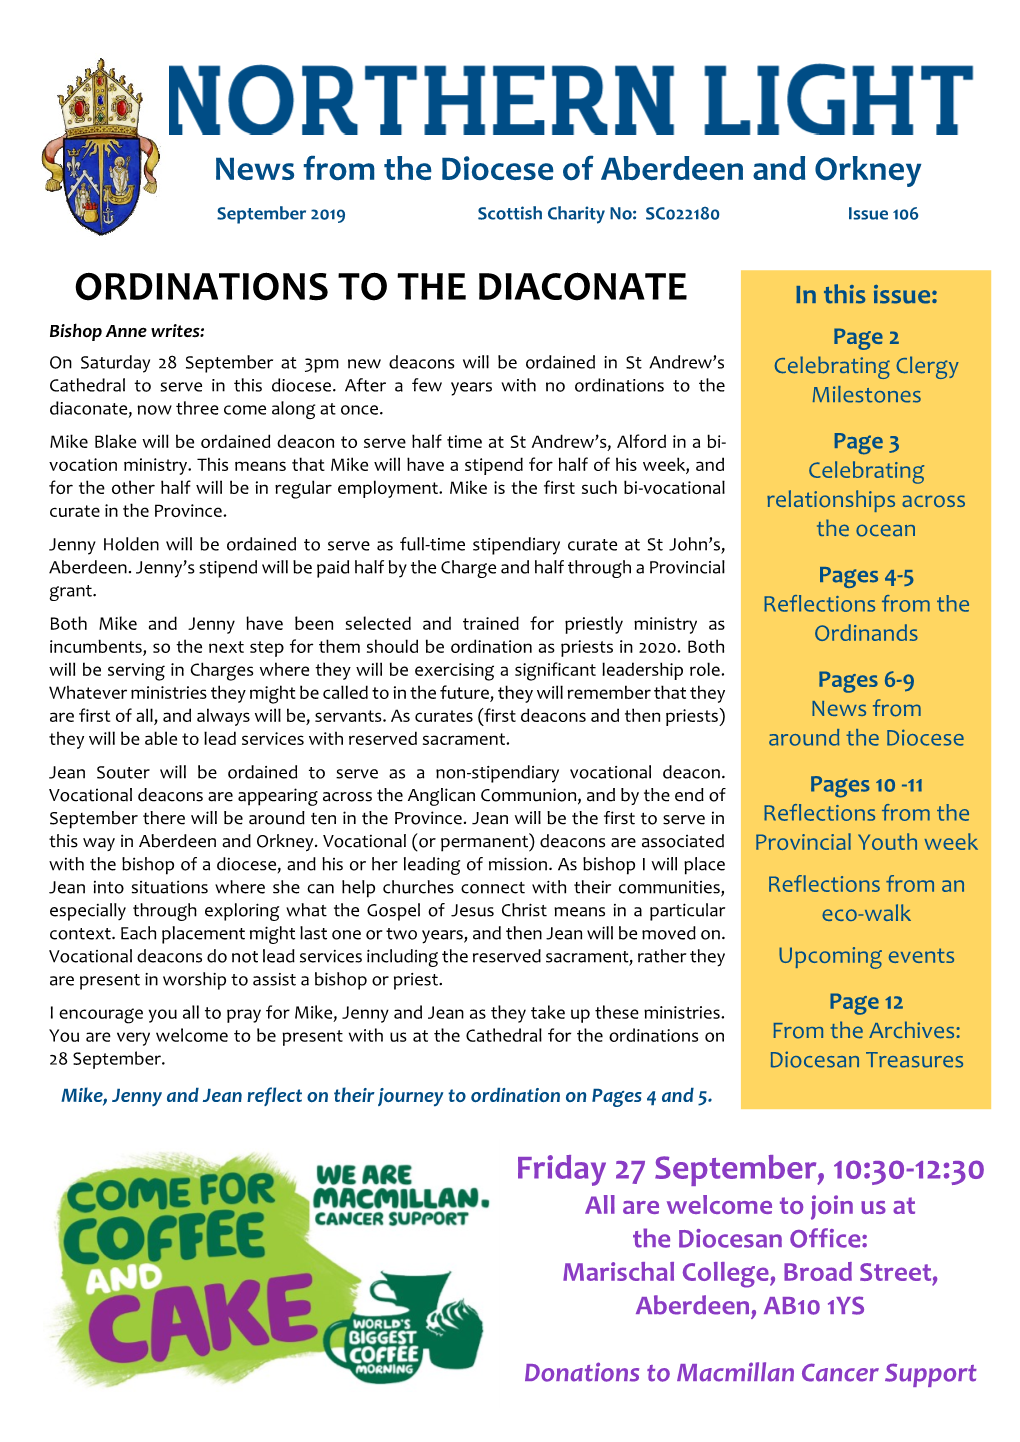 ORDINATIONS to the DIACONATE in This Issue